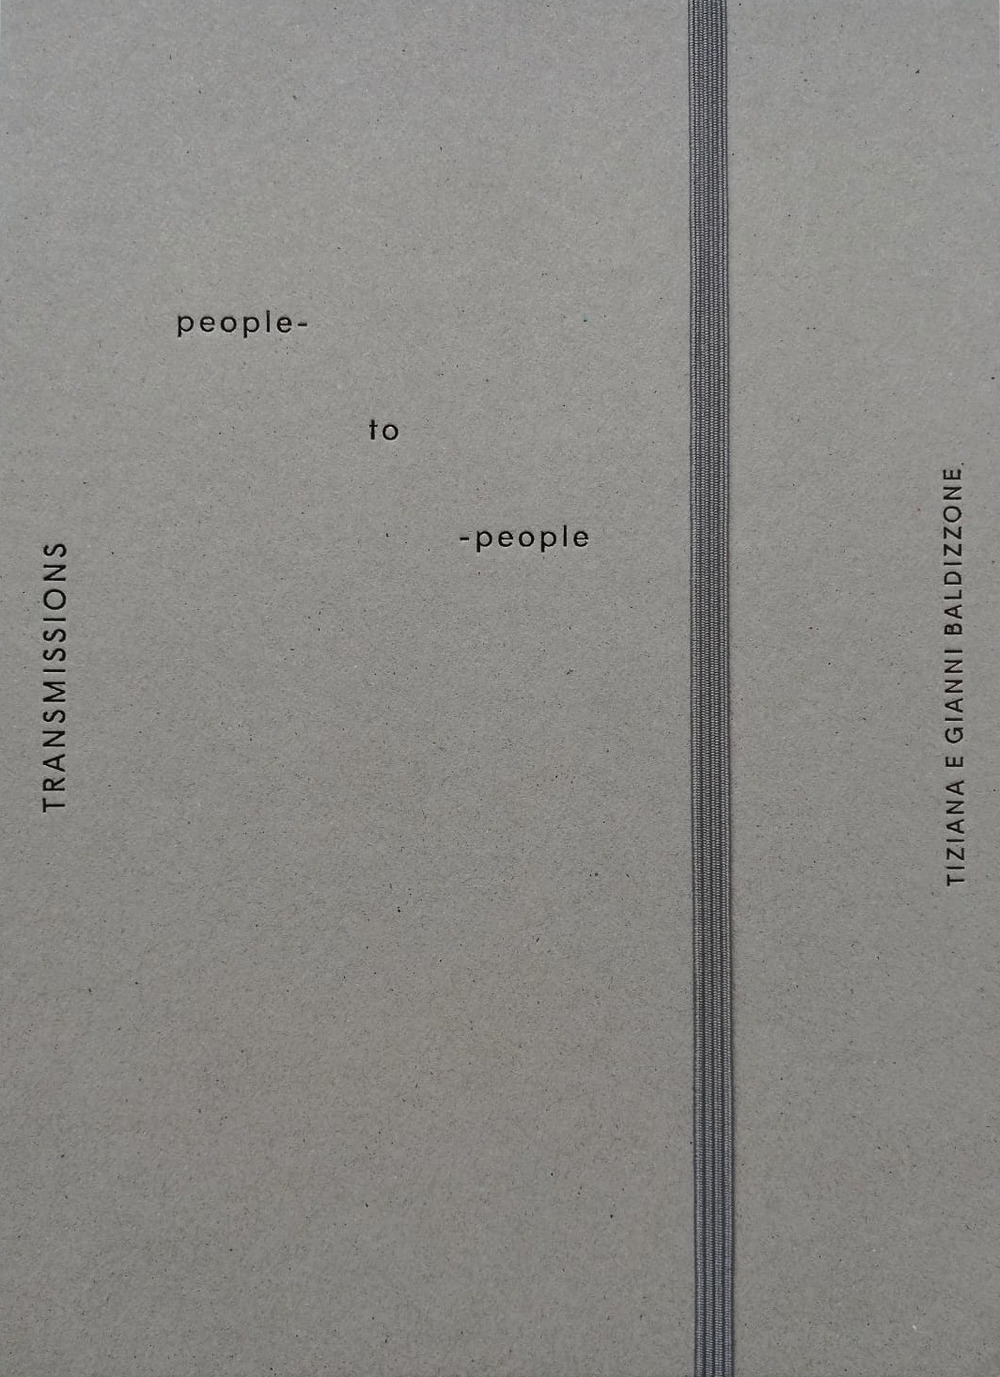 Transmissions. People-to-people